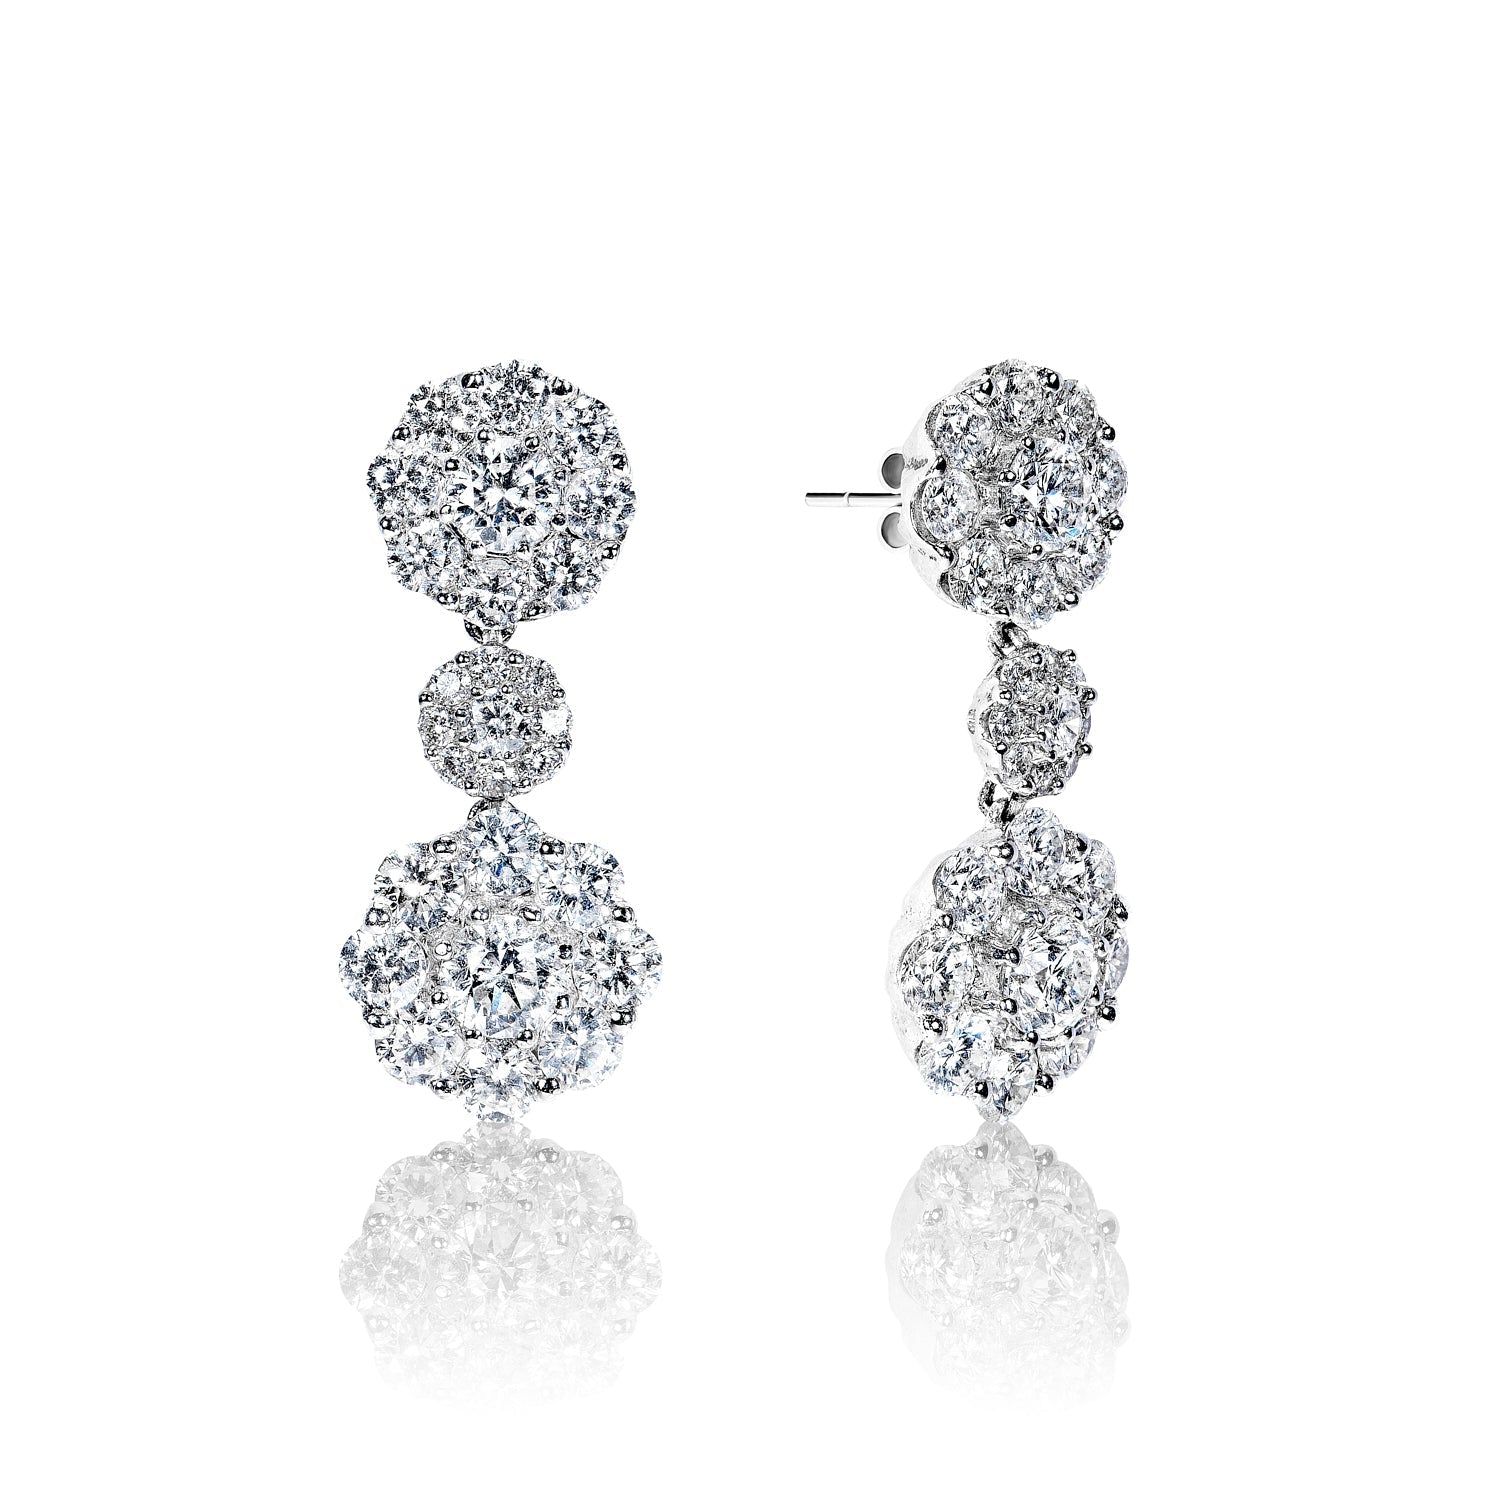 Maliyah 4 Carat Round Brilliant Diamond Drop Earrings in 18k White Gold Front and Side View